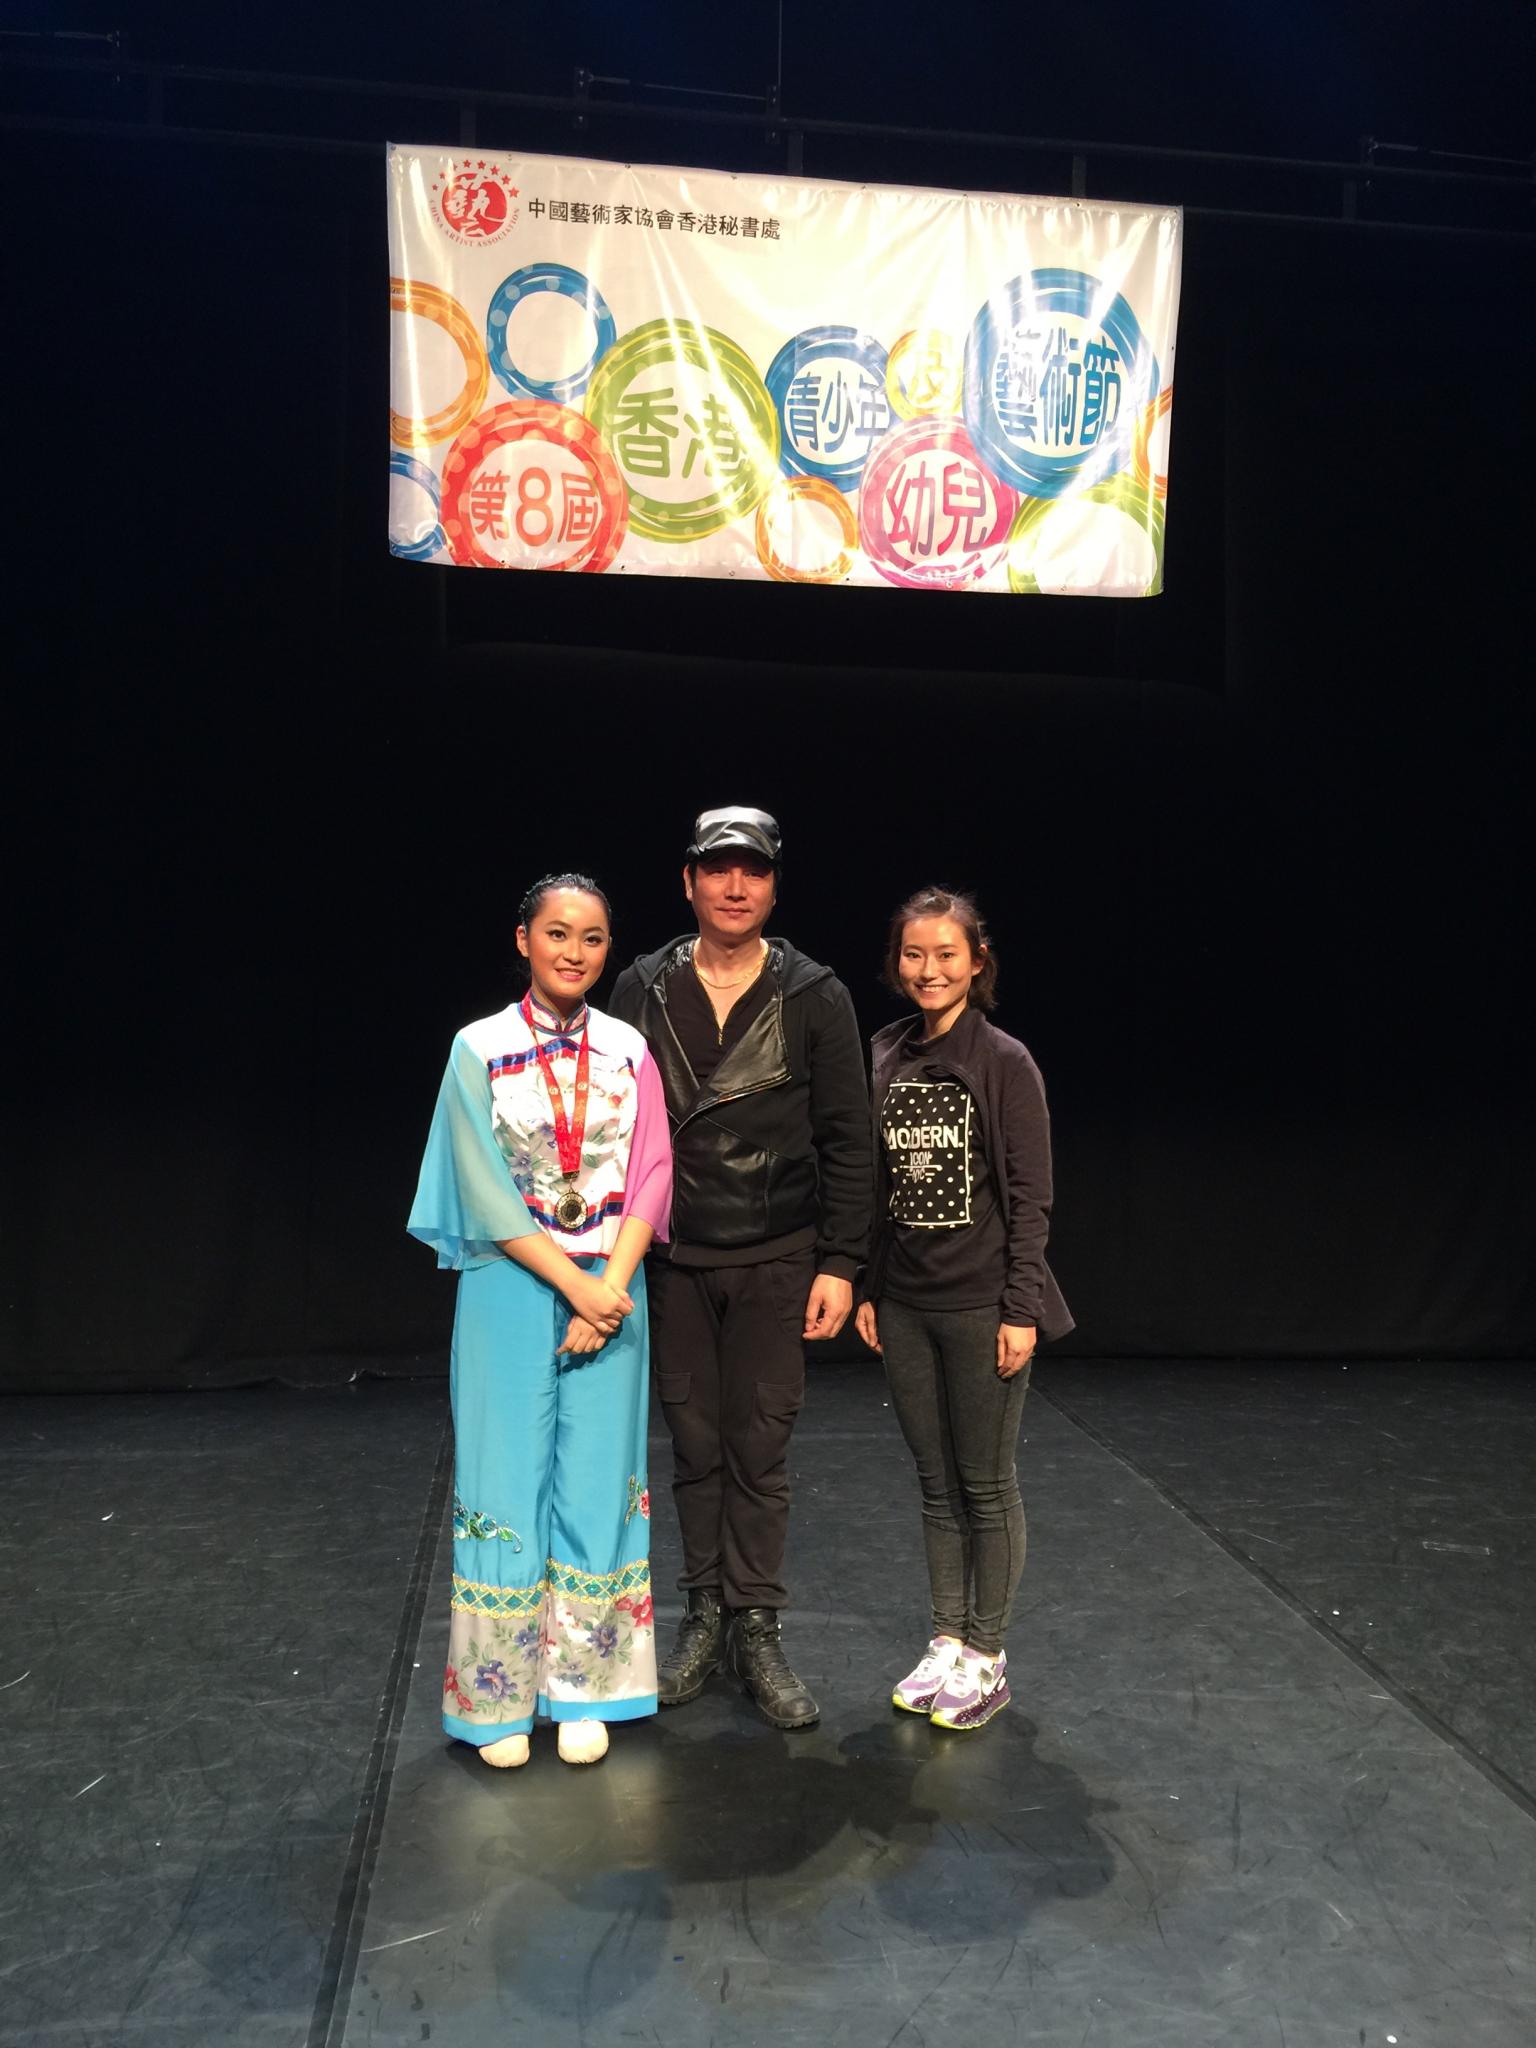 The Chinese Dance Team member, Chan Hei Tung won the silver award in the Junior Section of Chinese Solo Dance.